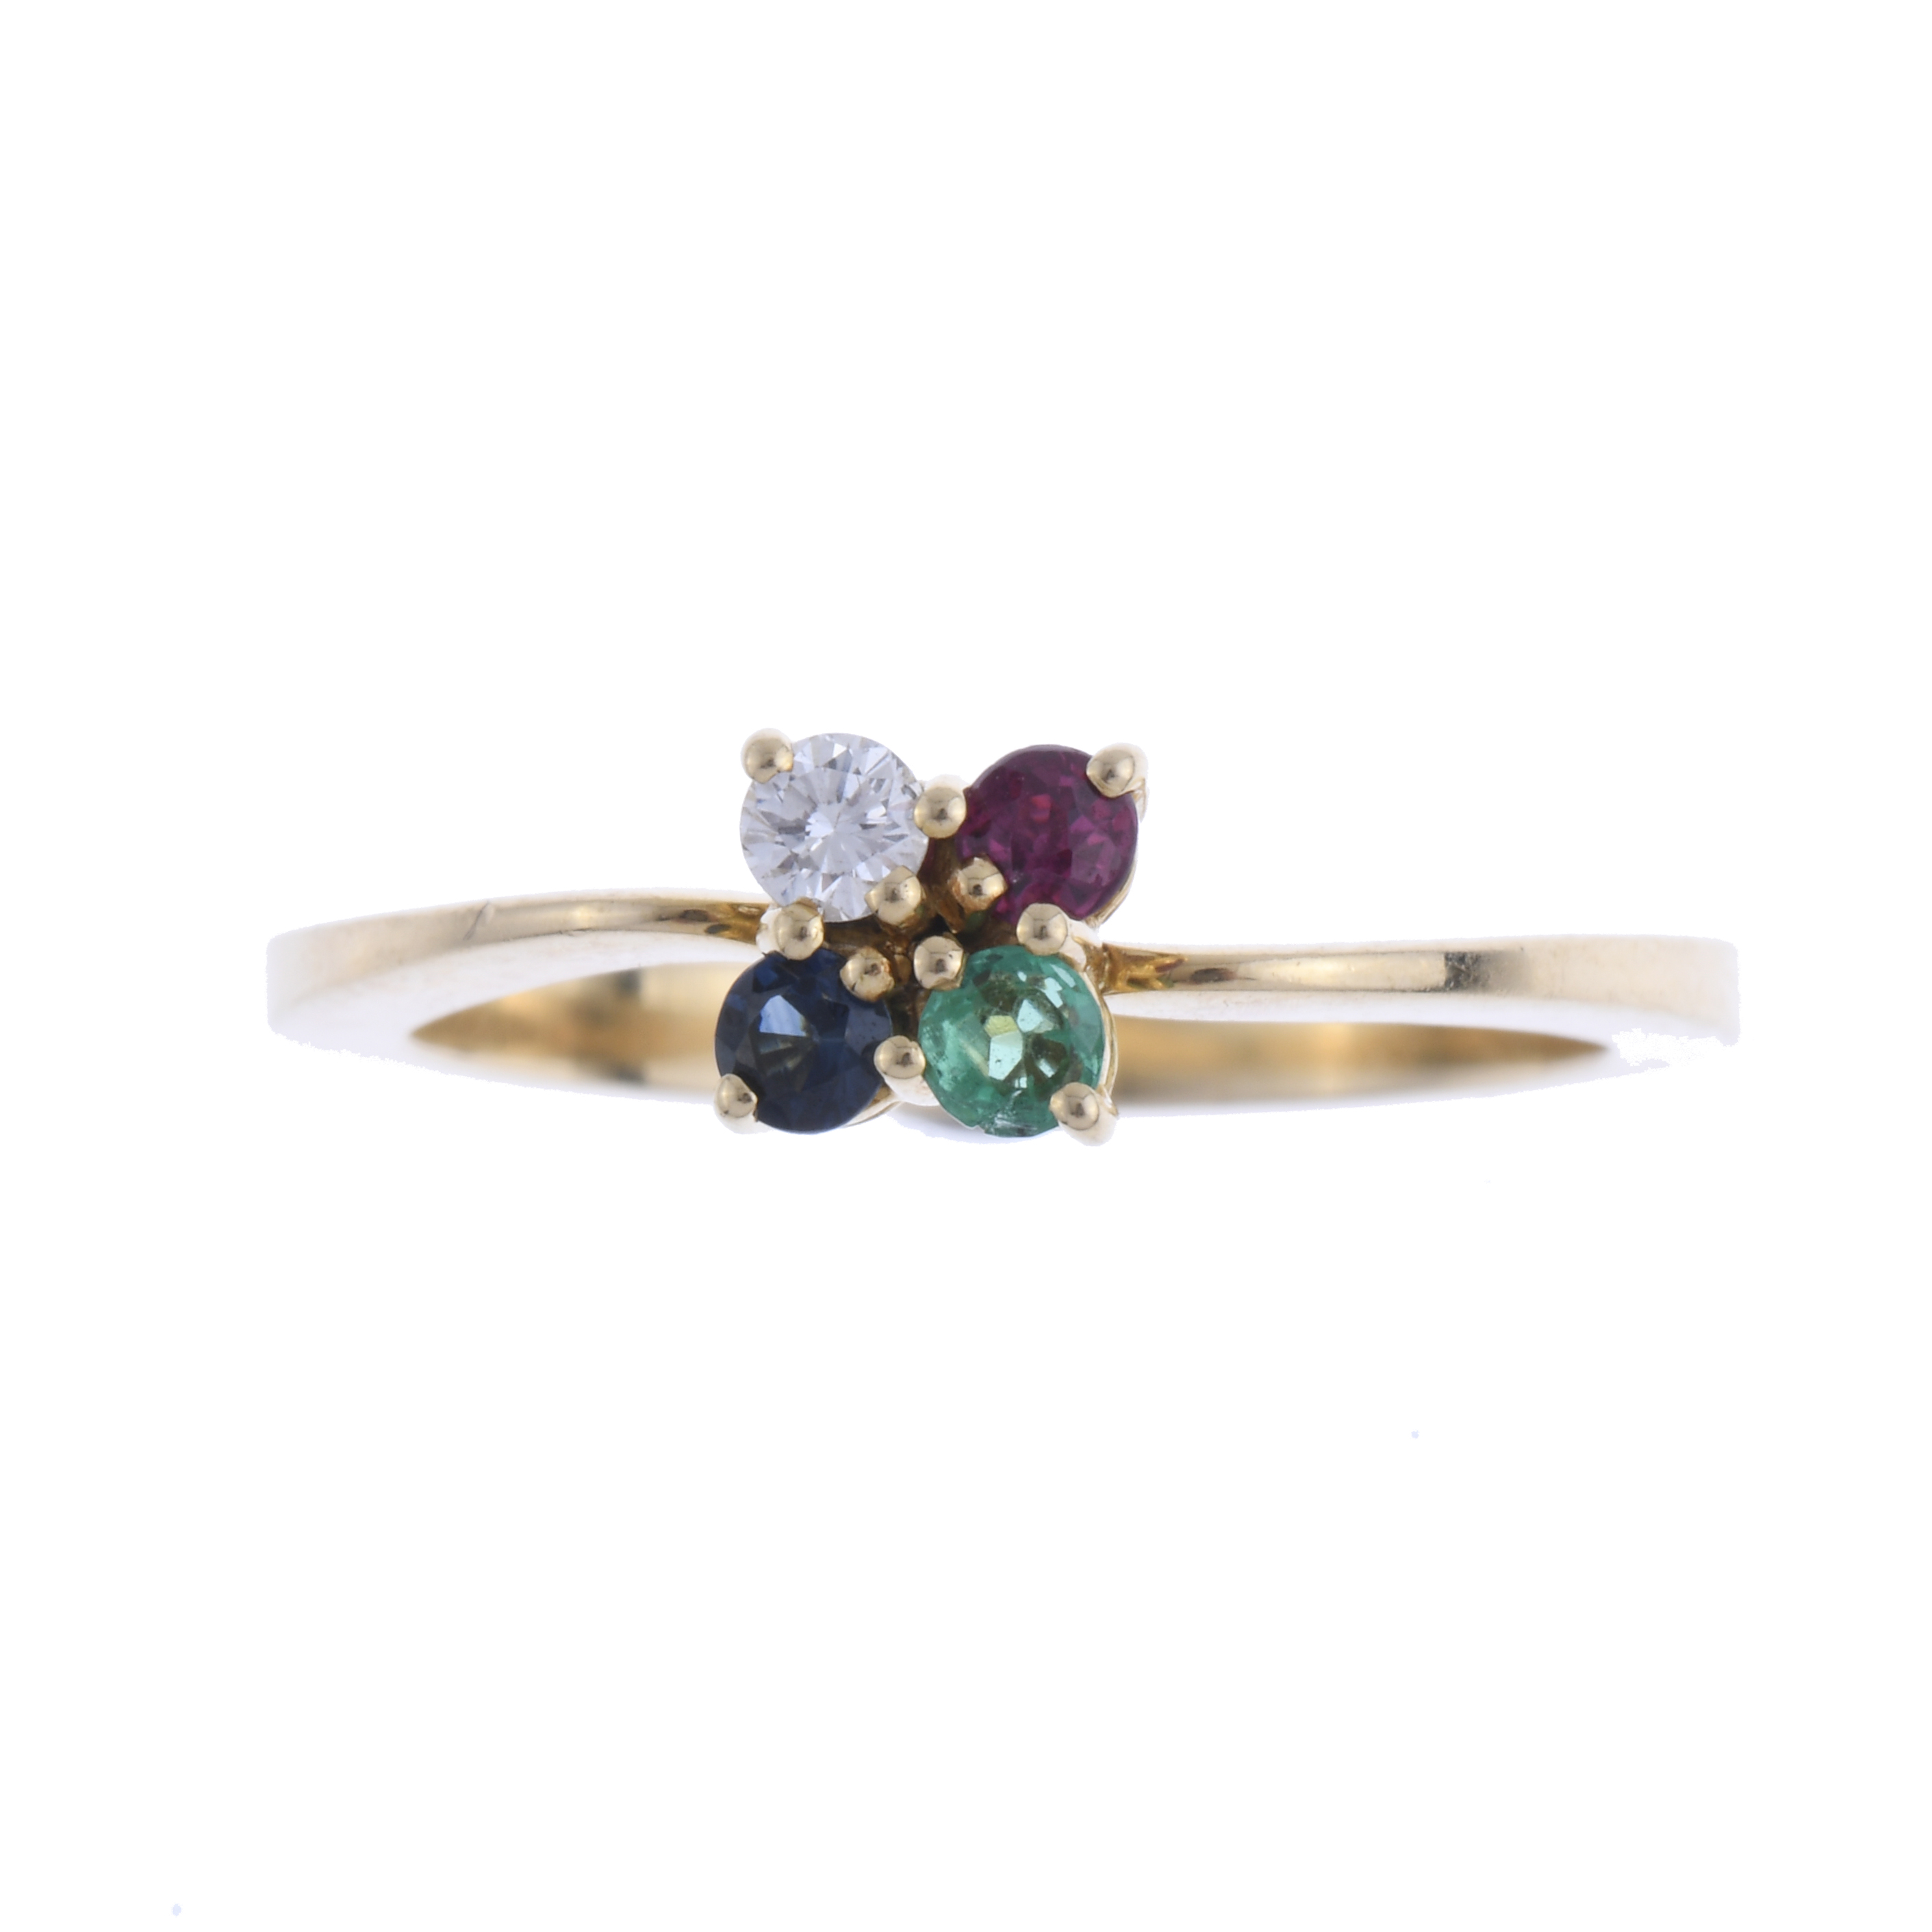 RING WITH FOUR GEMSTONES.